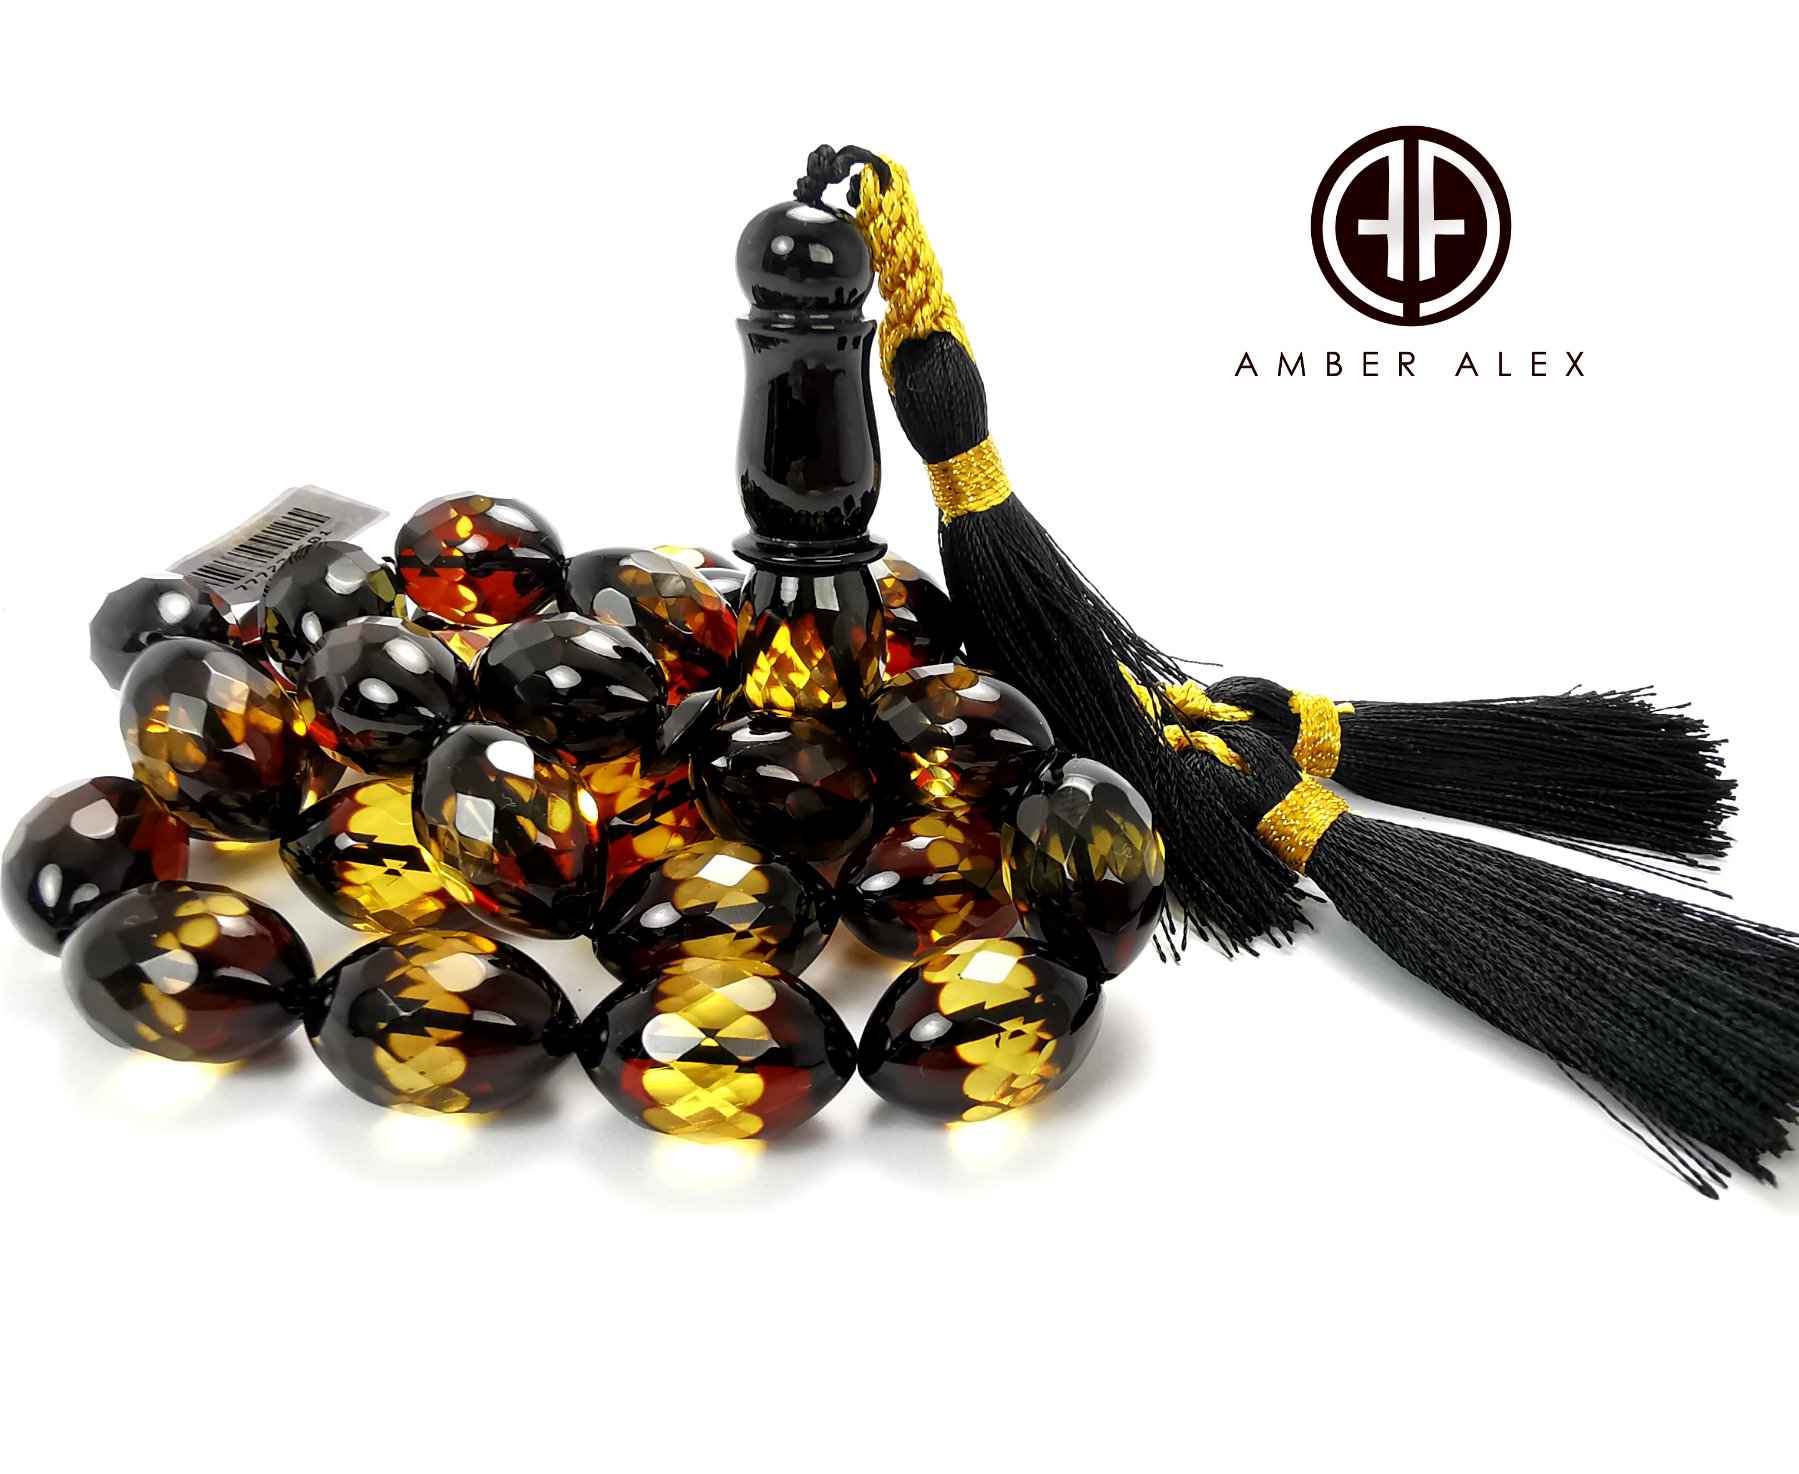 Two Toned Amber Faceted Olive Shape 12.5 mm Islamic Prayer Beads